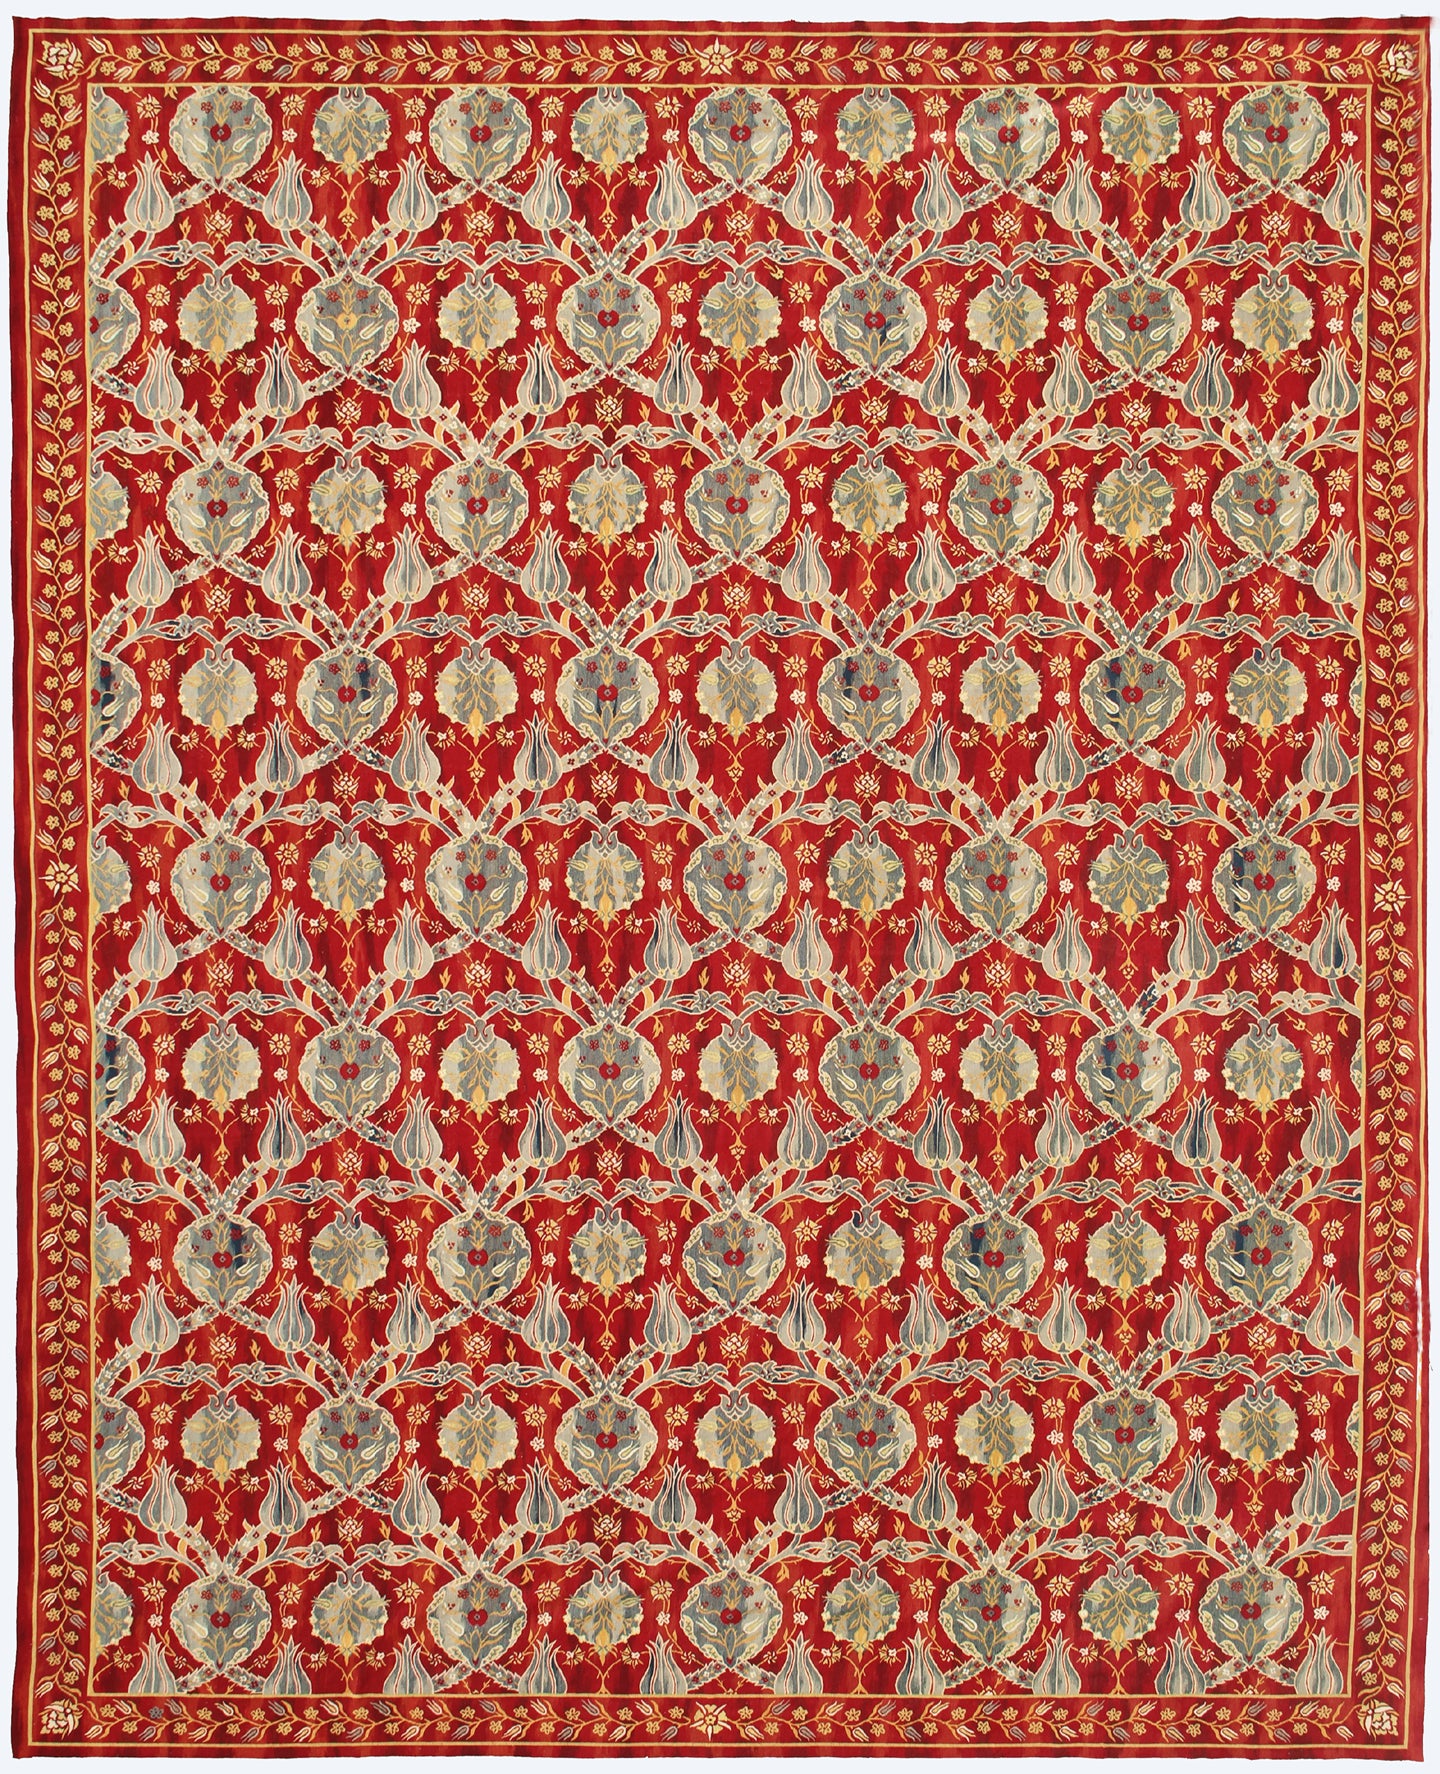 13x16 Red Aubusson Area Rug